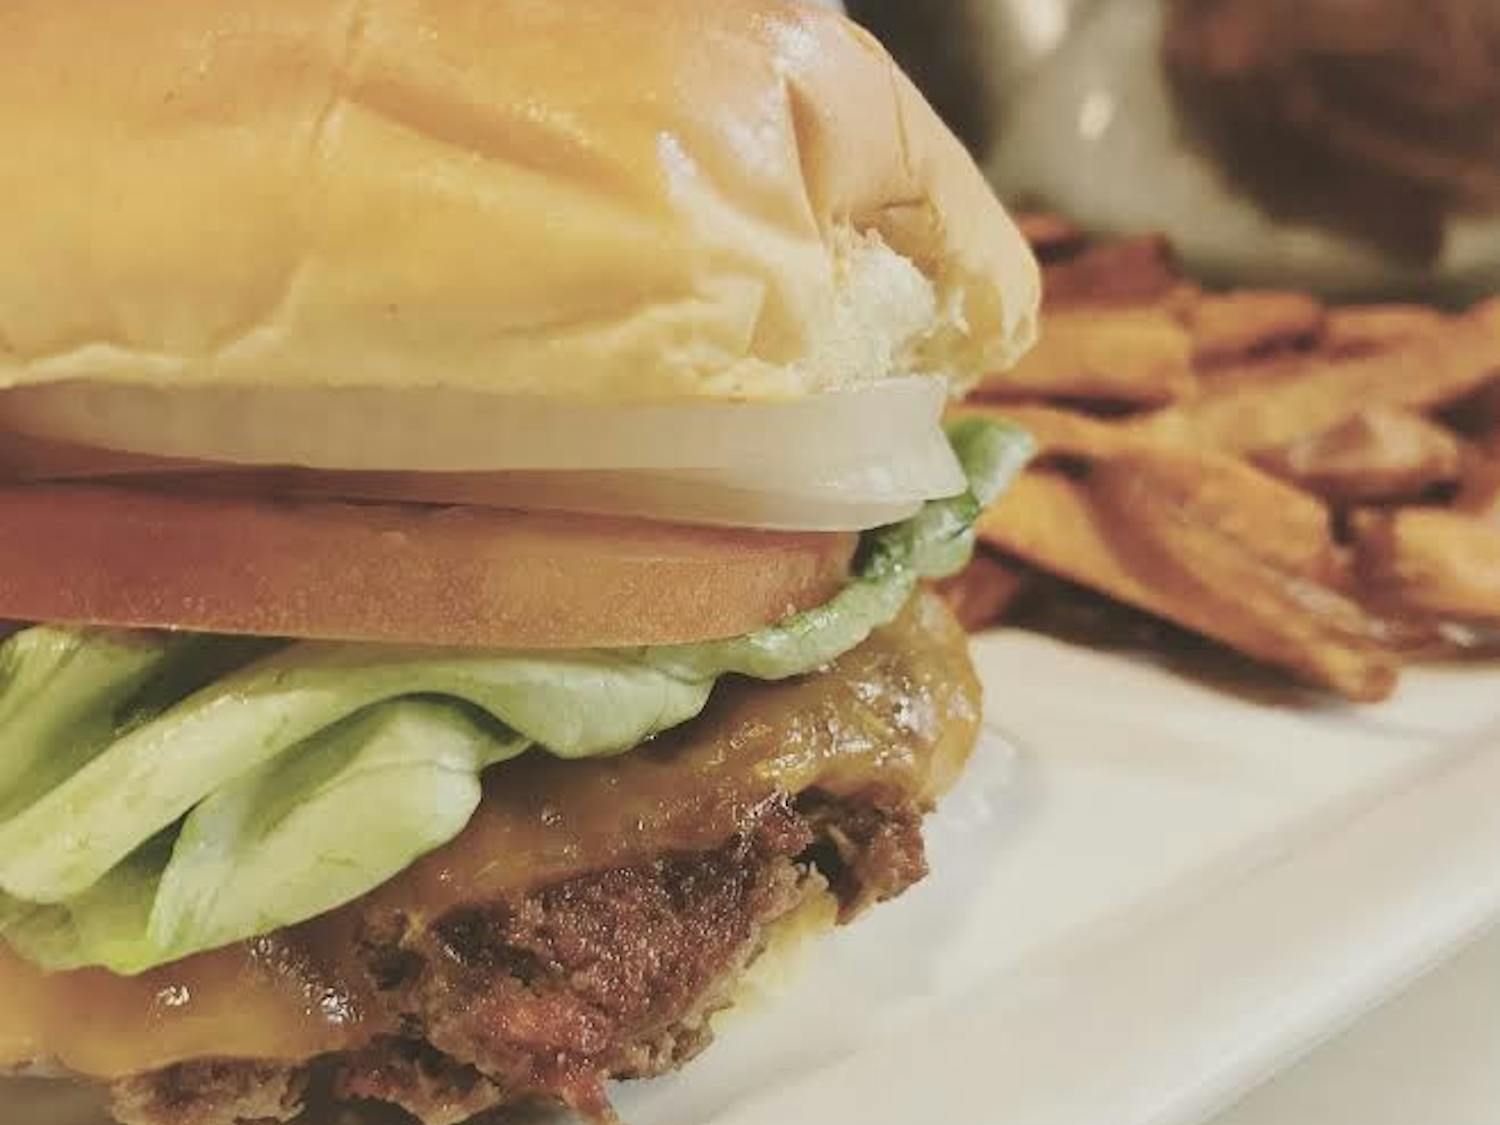 The Impossible Burger is a meatless option that tastes, looks and feels like real meat.&nbsp;